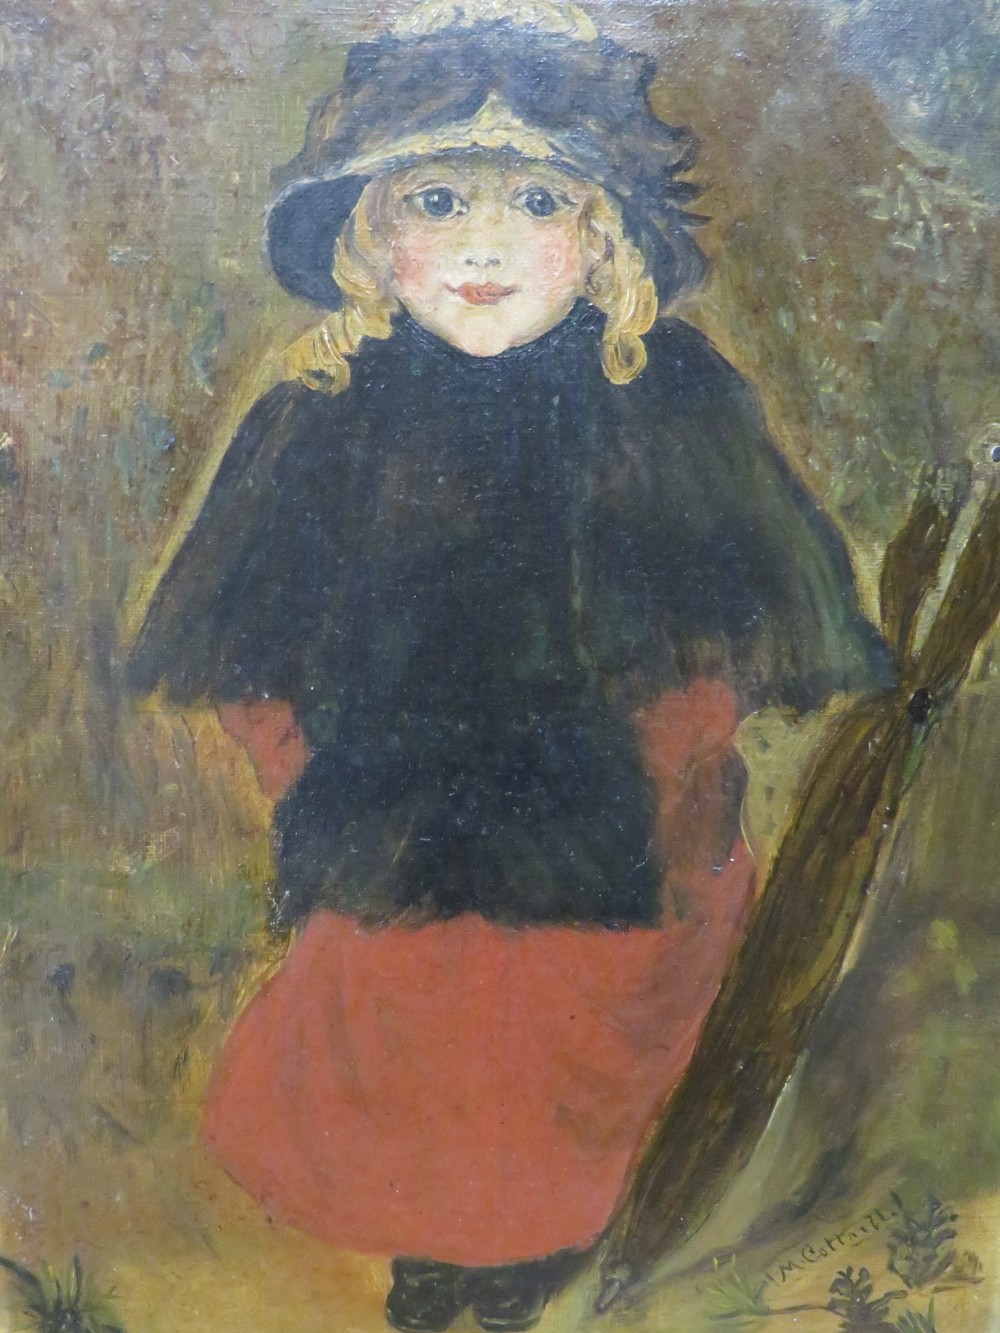 A.M.COTTERILL OIL ON CANVAS STUDY OF A YOUNG GIRL HOLDING AN UMBRELLA